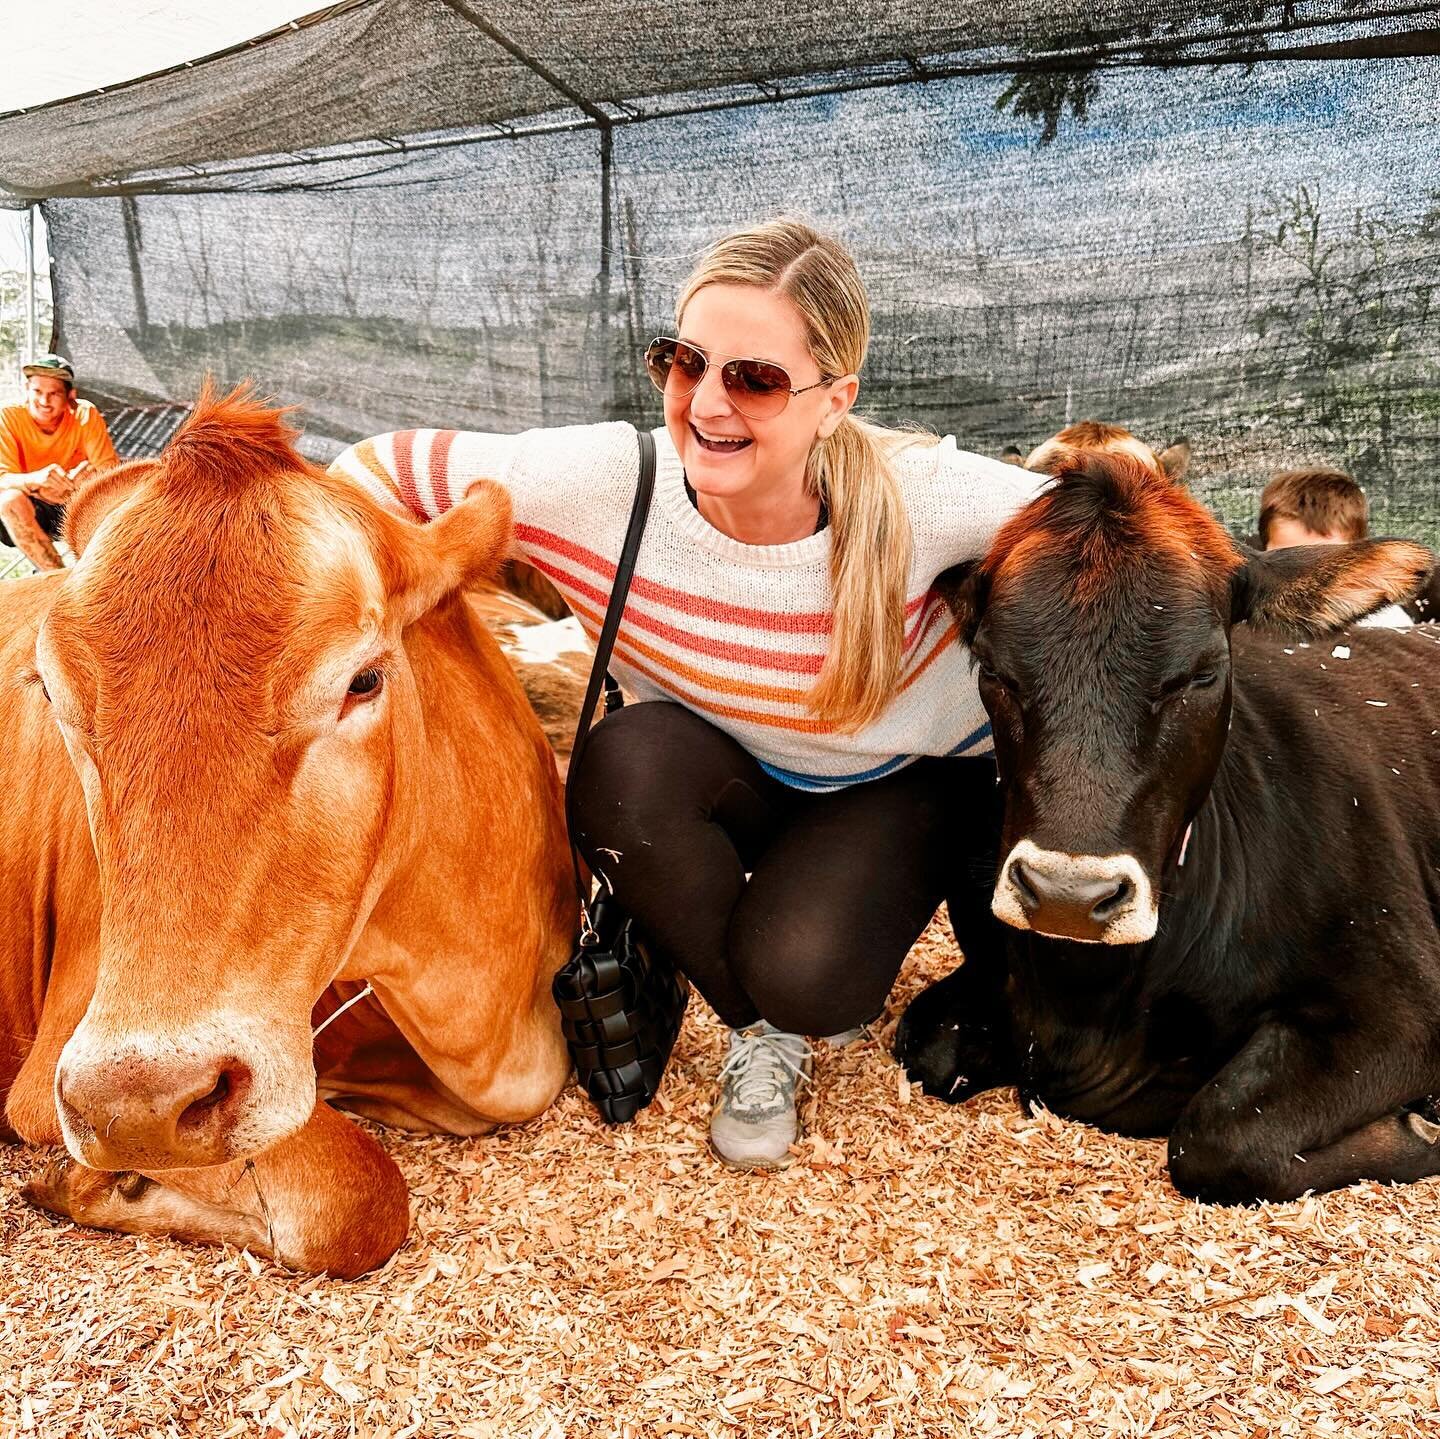 One of my favorite stops in Hawaii was to cuddle with cows 🐮🐄

If you go to the Big Island definitely stop at @krishnacowsanctuary 🐮

#bigisland #cows #cowsanctuary #hawaii #visithawaii